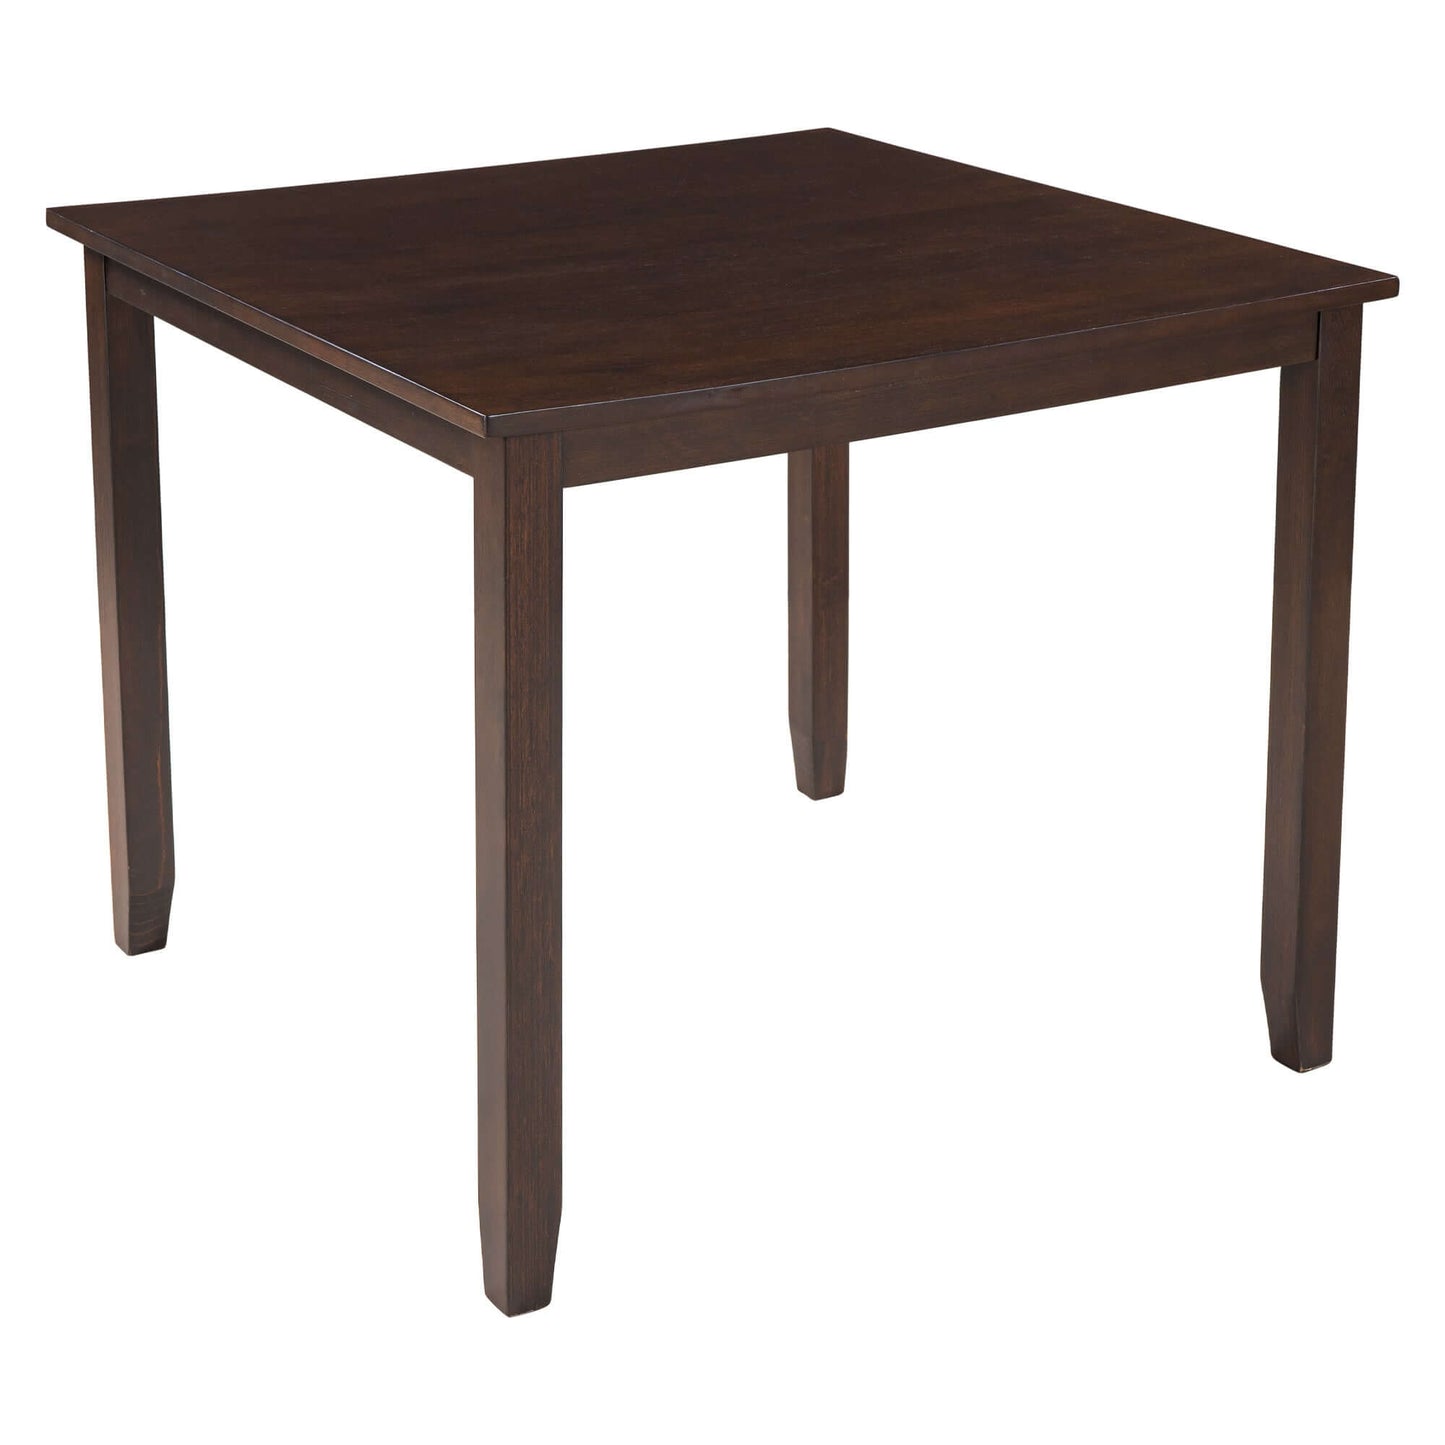 Wooden dining table in espresso finish with an industrial design, part of a 5 piece dining table set for kitchen and dining room.